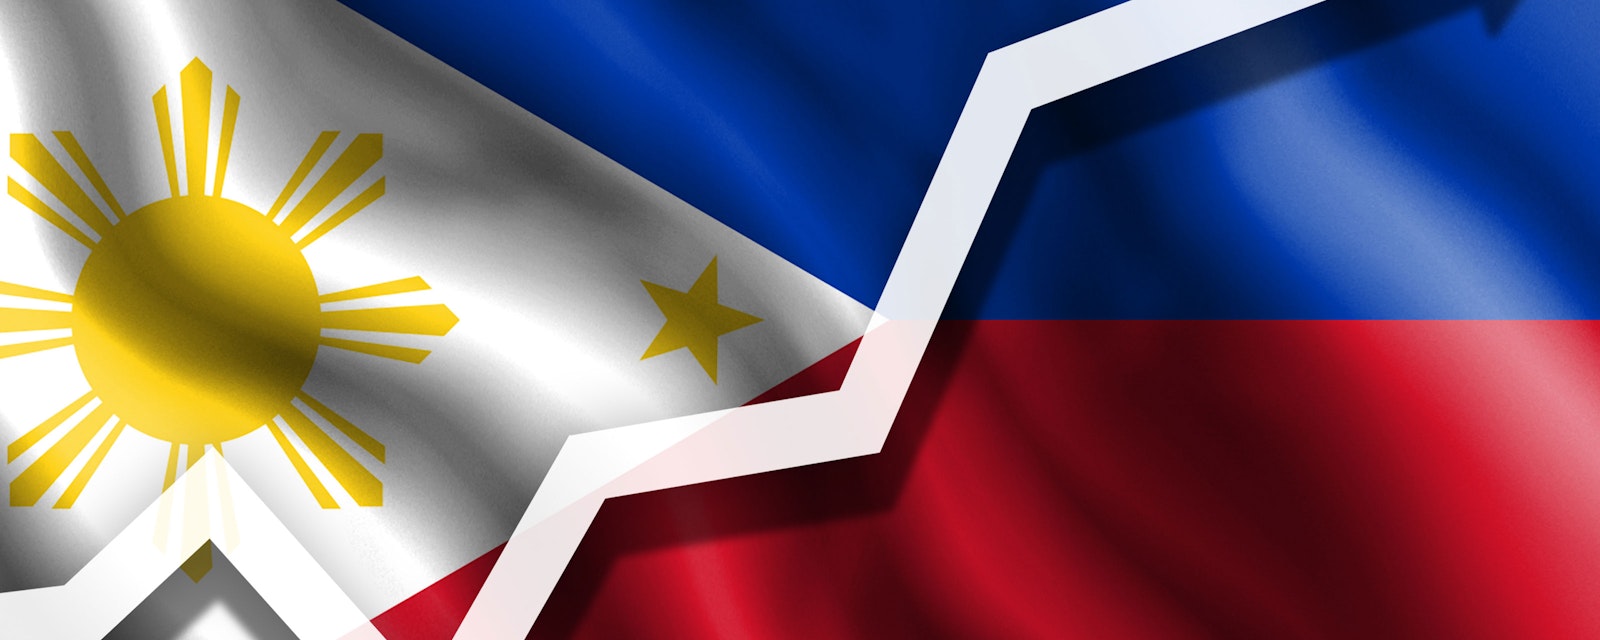 White arrow pointing up against the background of the flag of Philippines